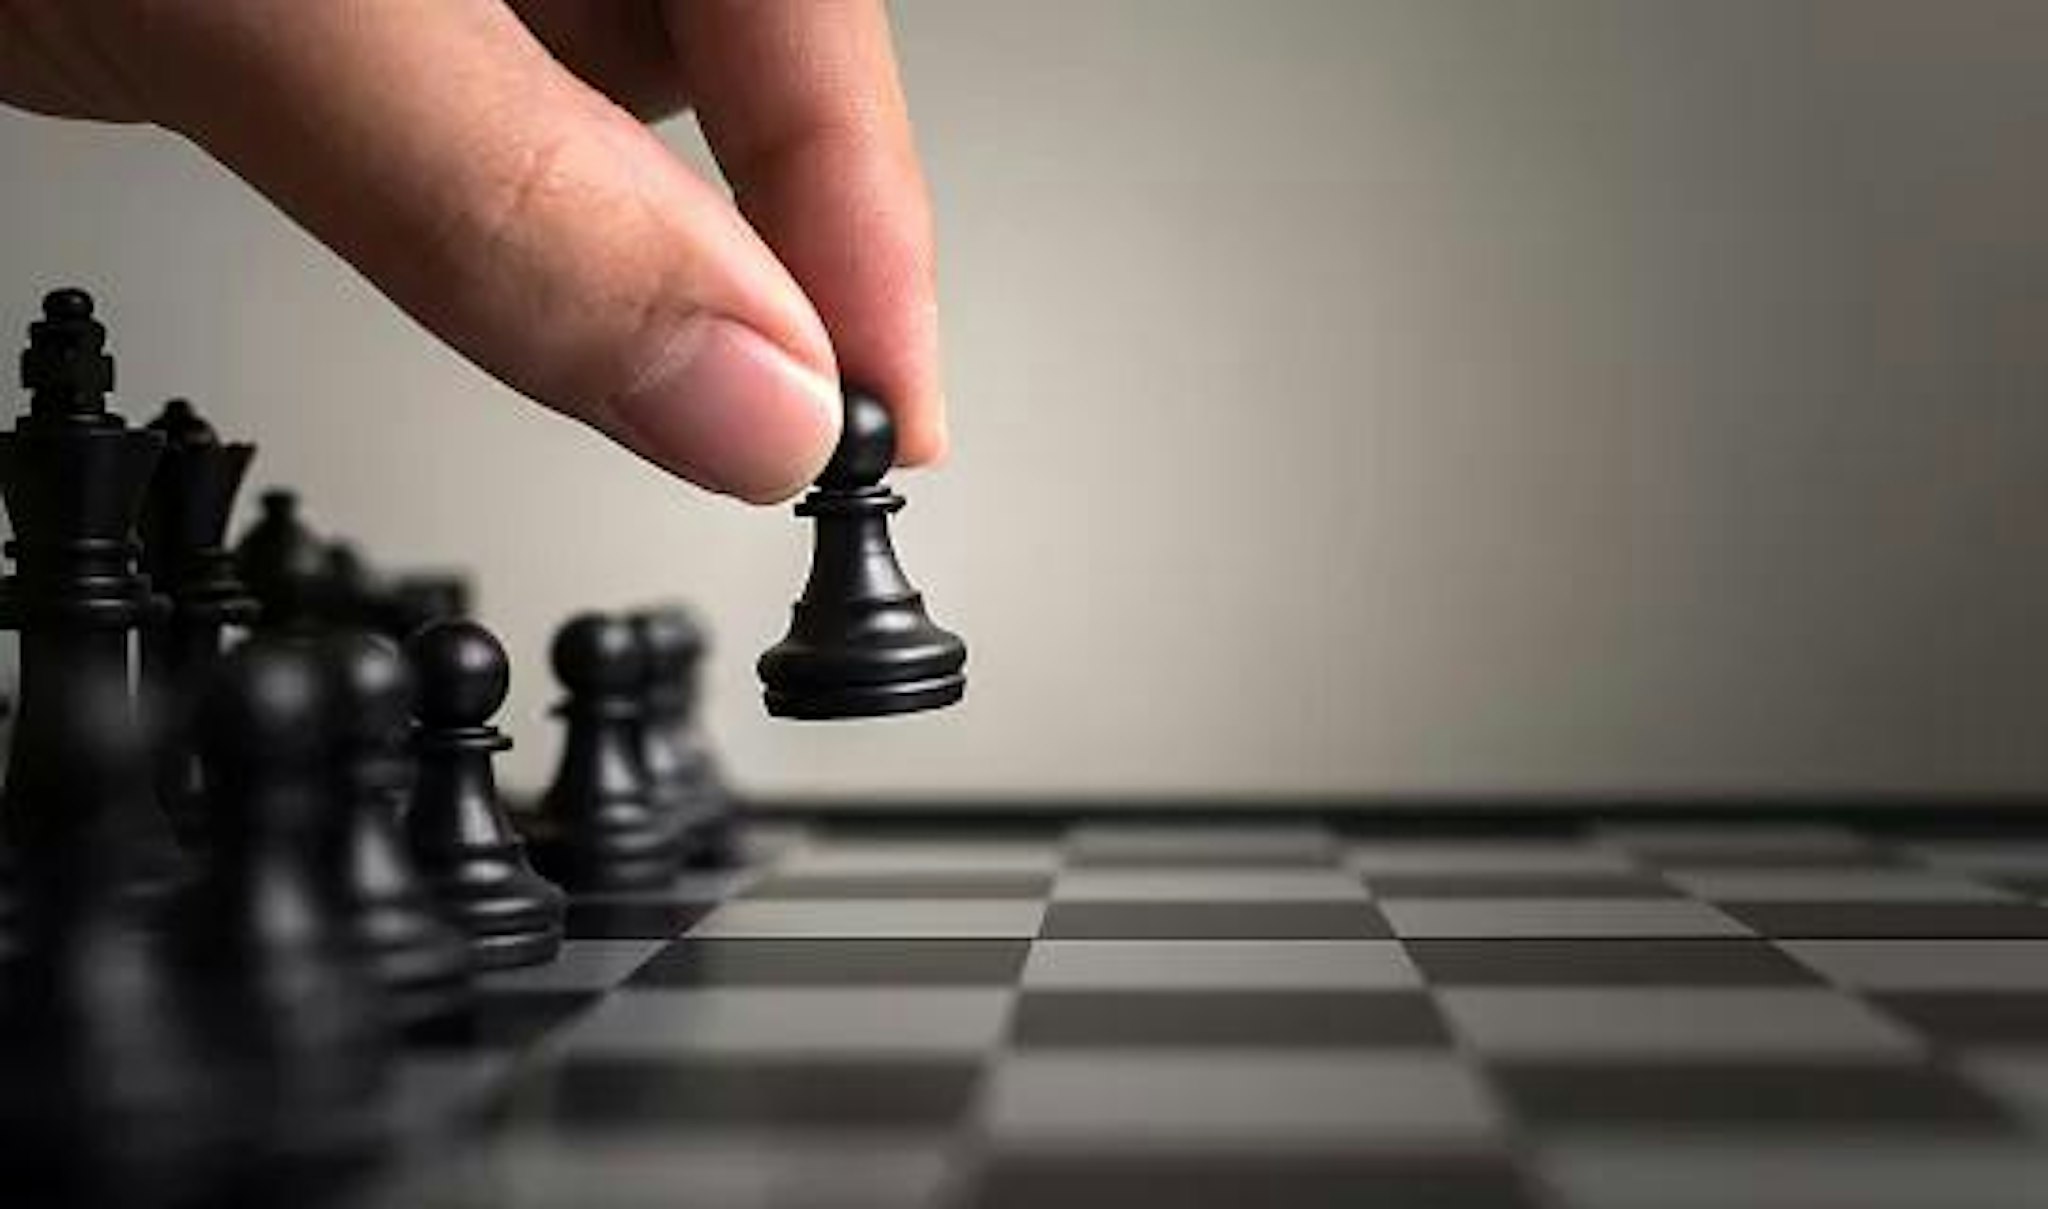 Chess board representing the risk management roles for board of directors